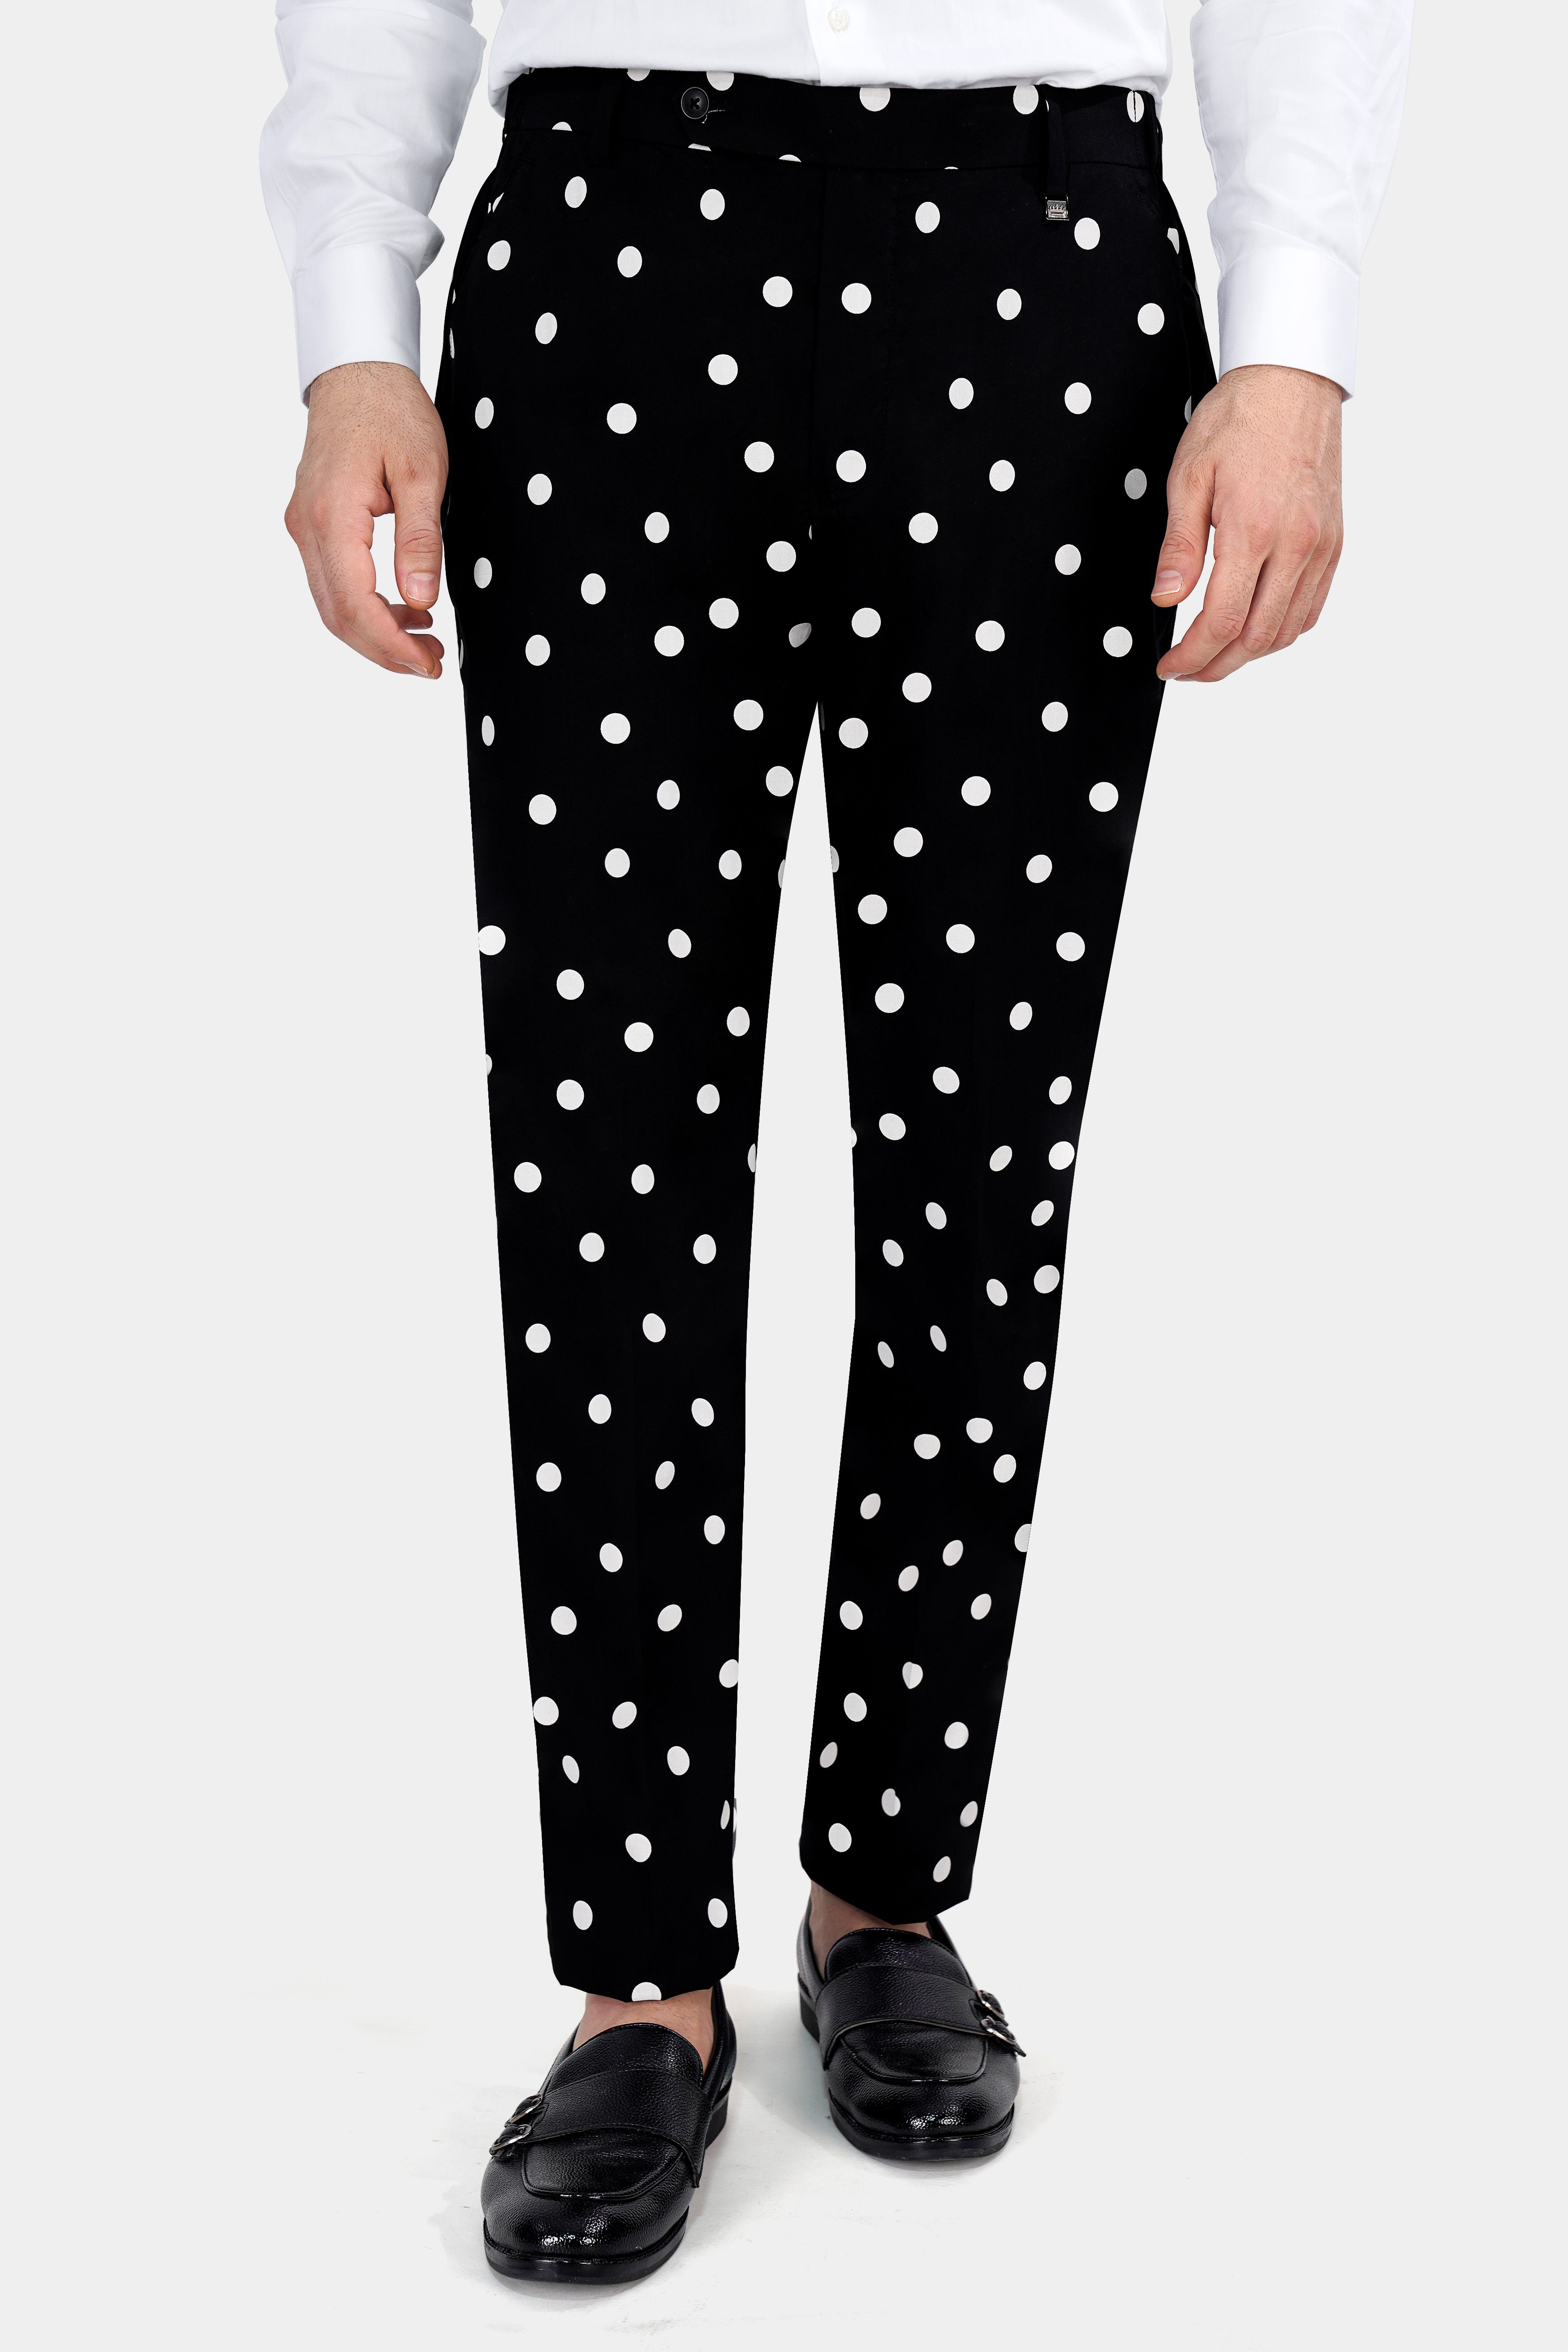 Jade Black with White Polka Dotted Premium Cotton Pant T2844-SW-28, T2844-SW-30, T2844-SW-32, T2844-SW-34, T2844-SW-36, T2844-SW-38, T2844-SW-40, T2844-SW-42, T2844-SW-44